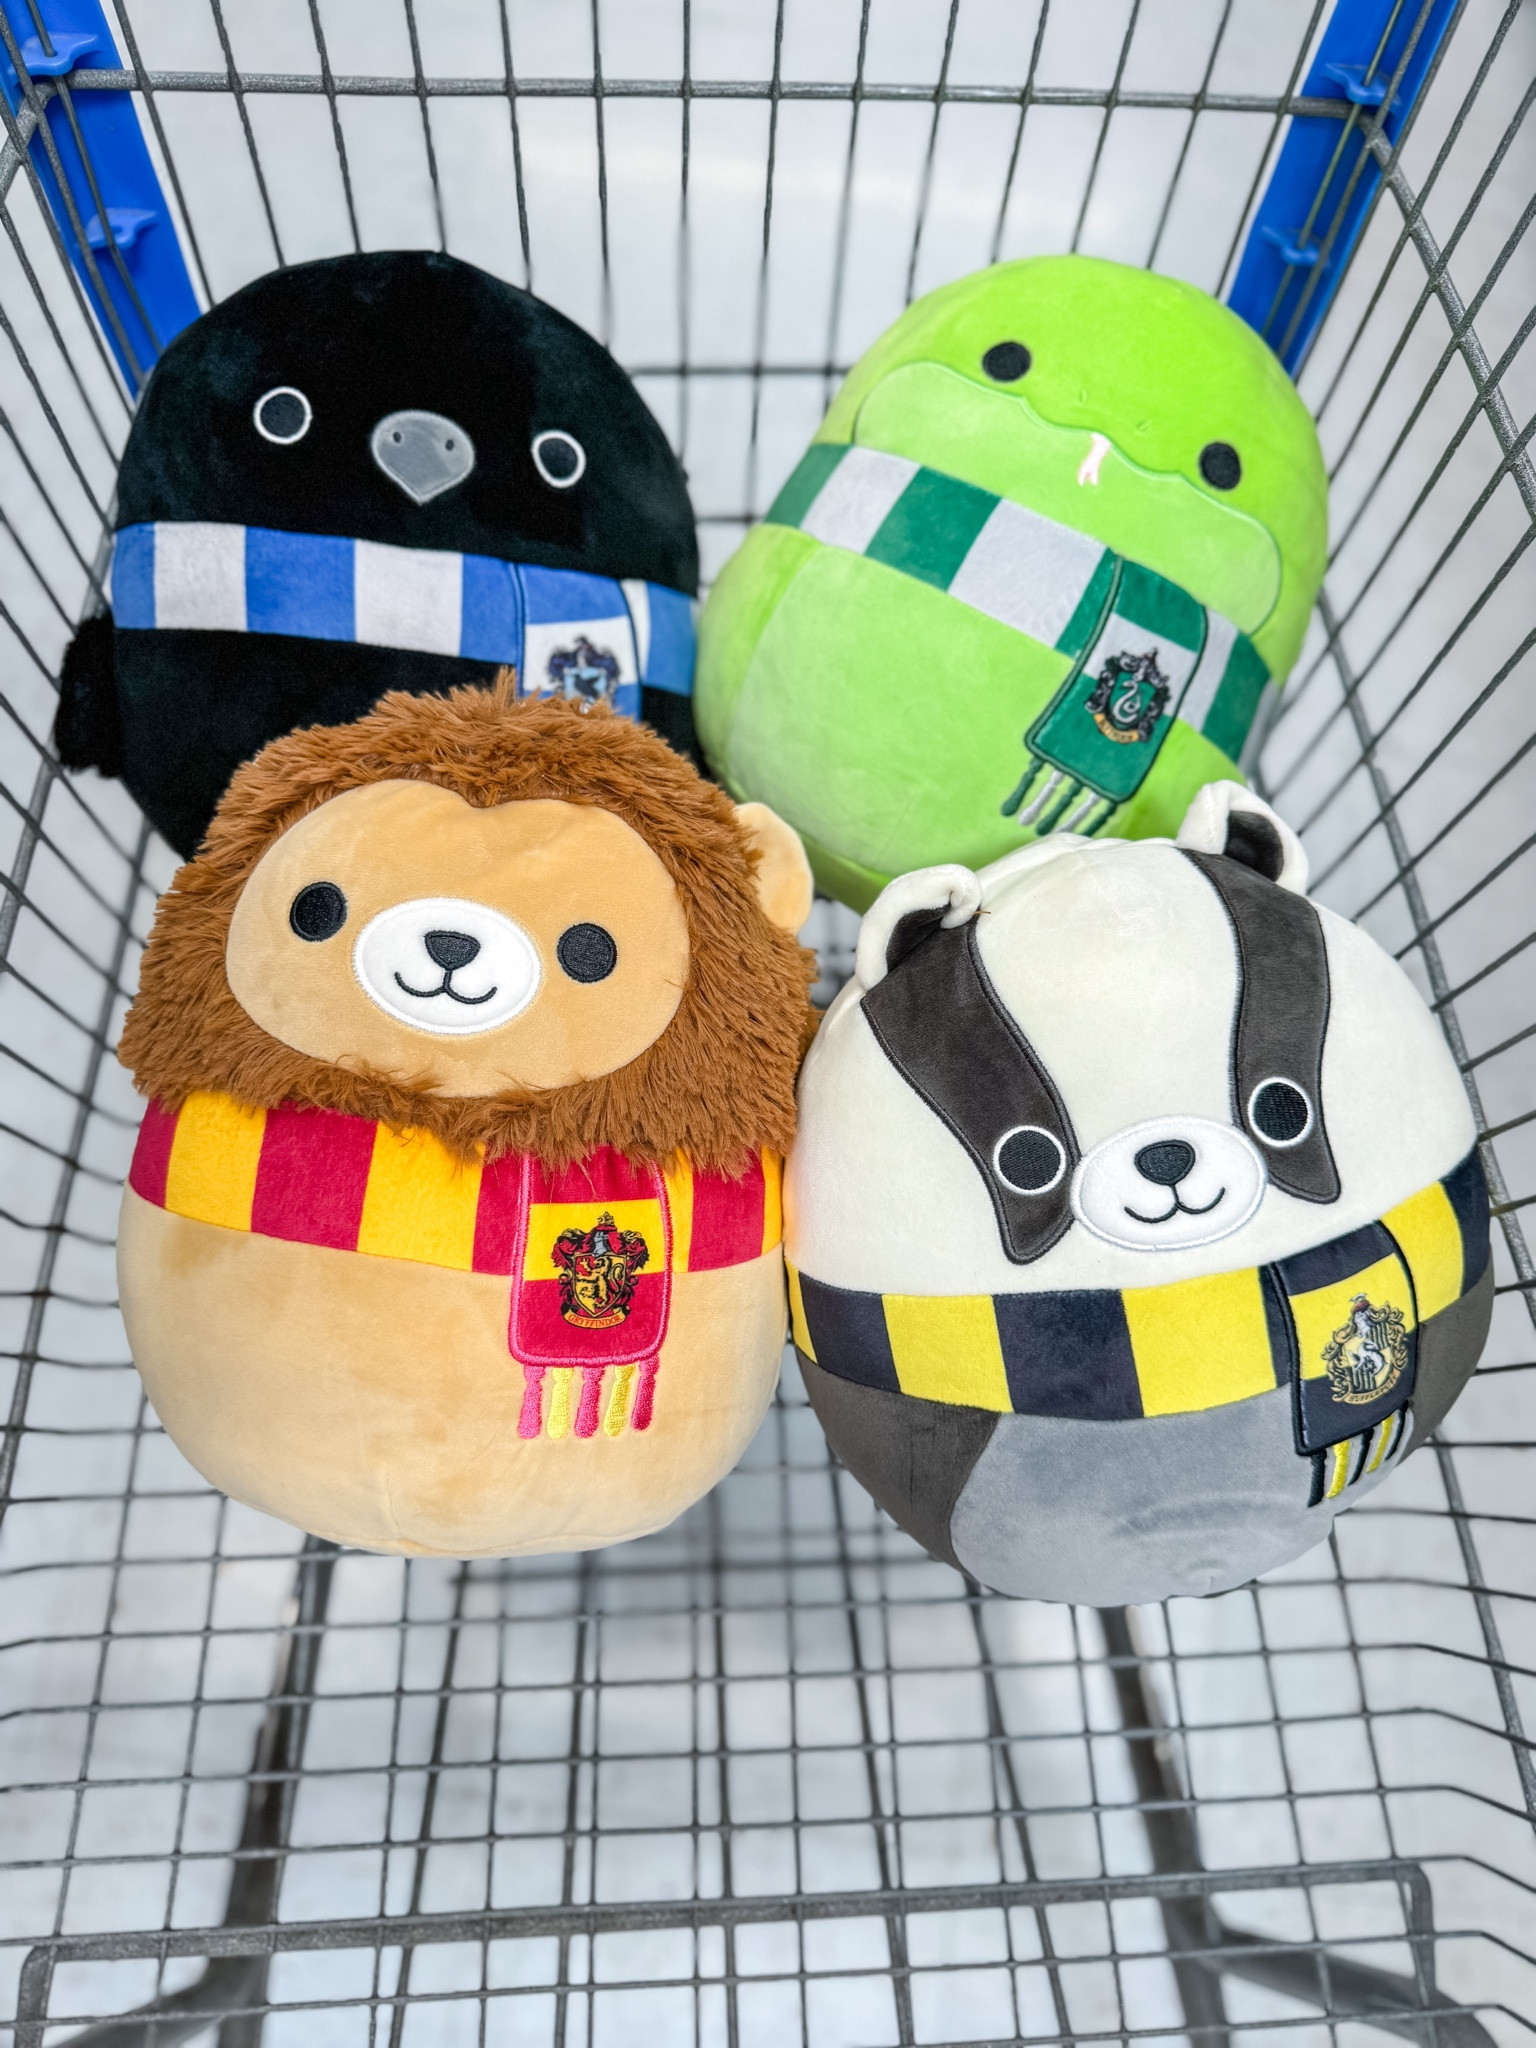 Squishmallows Harry Potter 10 Gryffindor Lion Plush Toy : Target